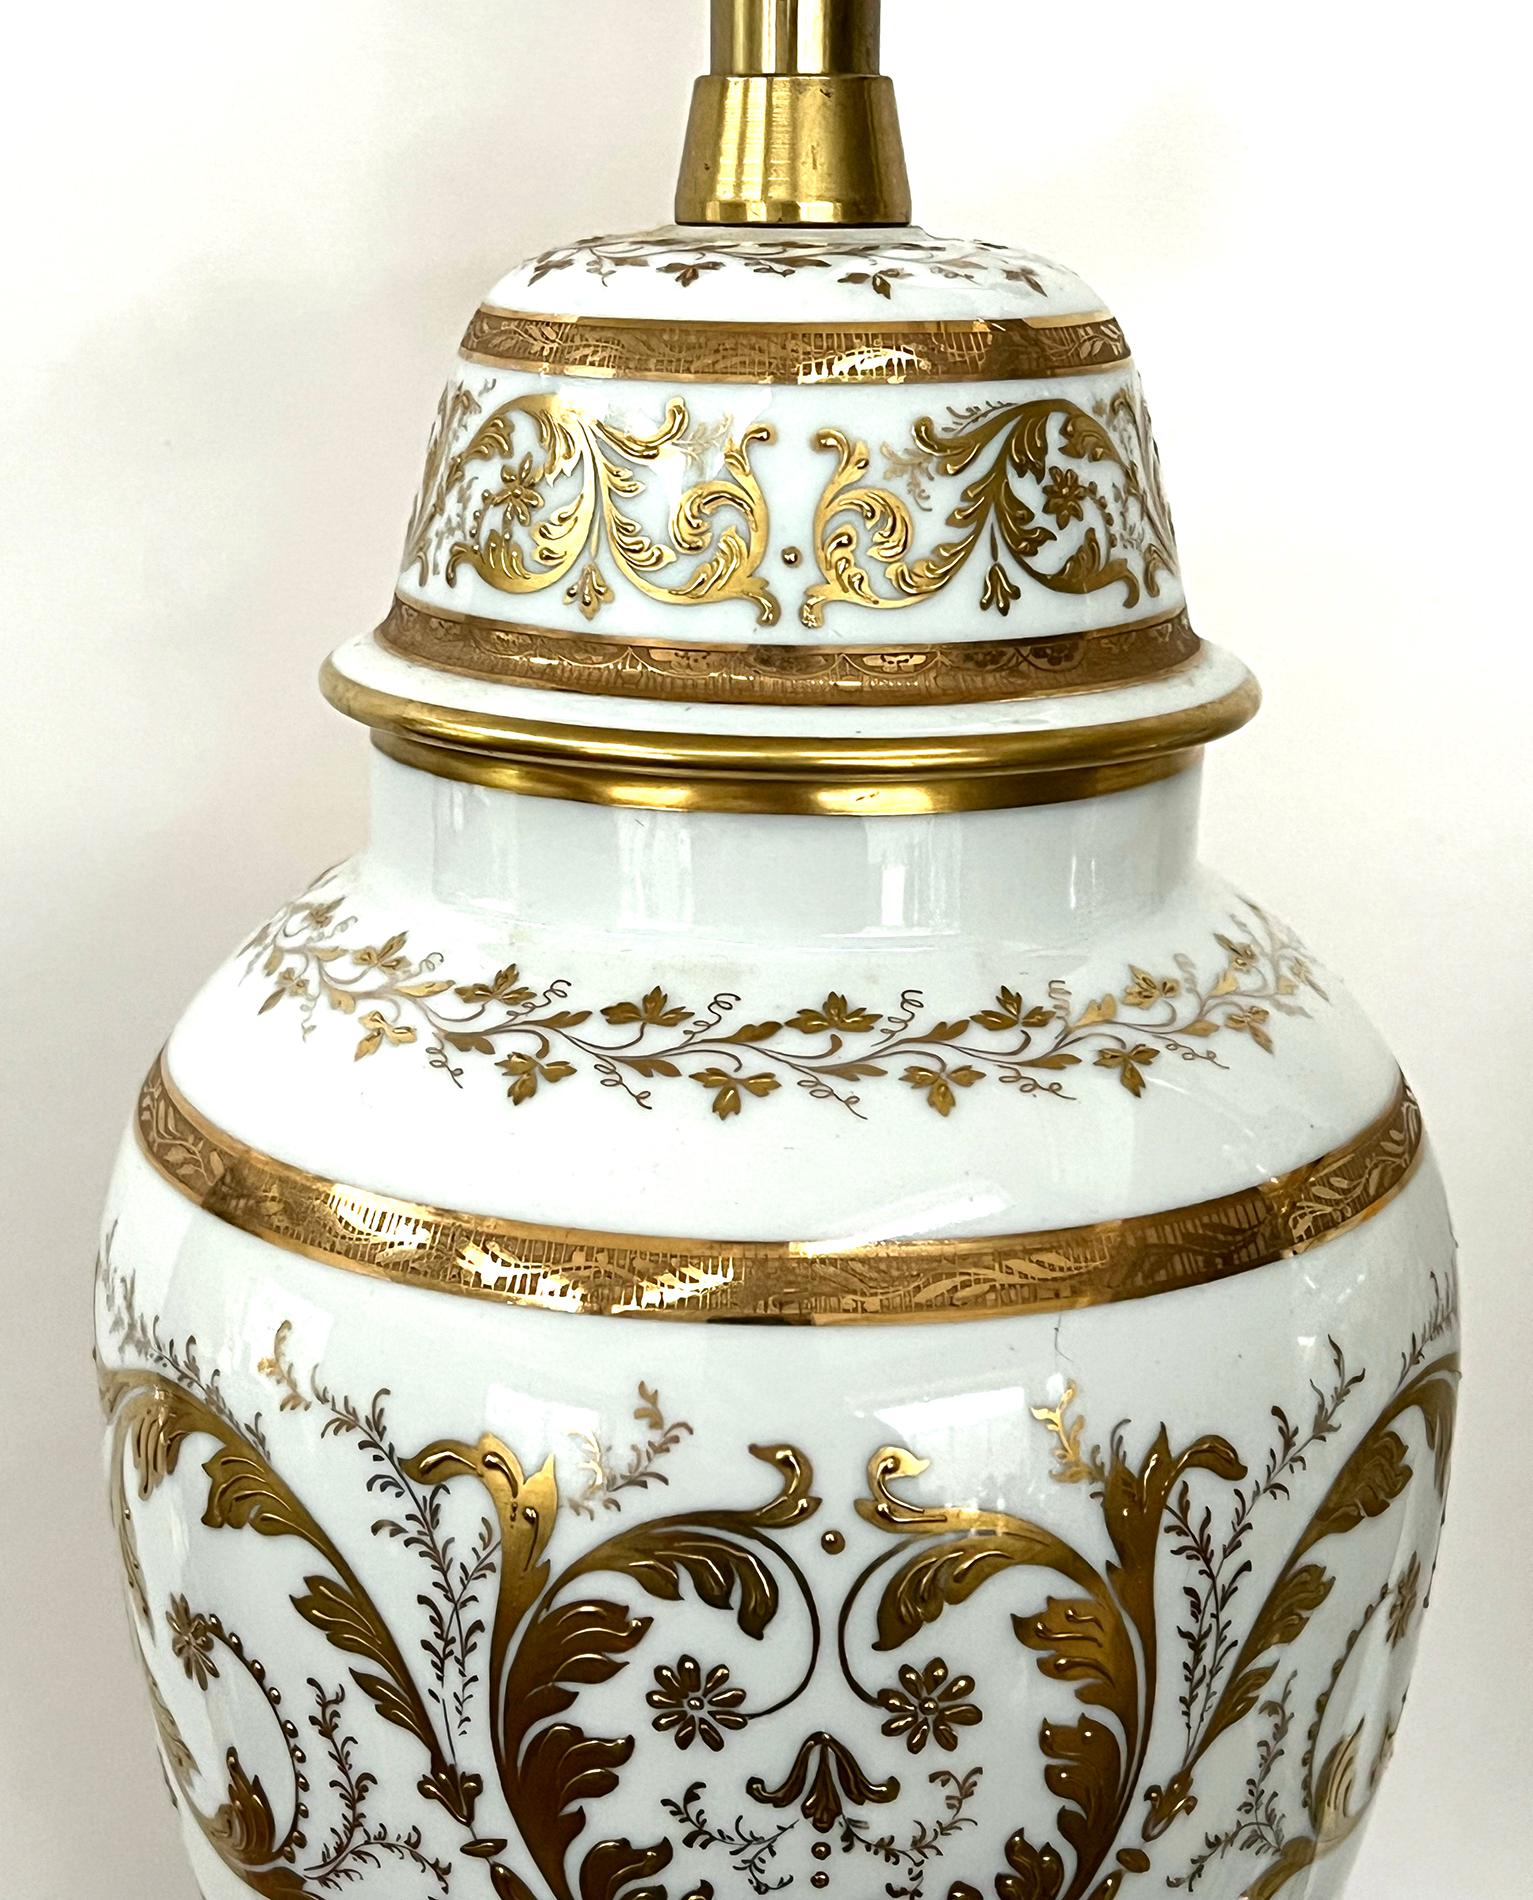 each elegant lamp of ovoid form with domed lid all over a splayed base; adorned overall with applied gilt decoration of meandering foliate vines and scrollwork

The Marbro Lamp Company was established by Morris Markoff and his brother (Mar-bro)